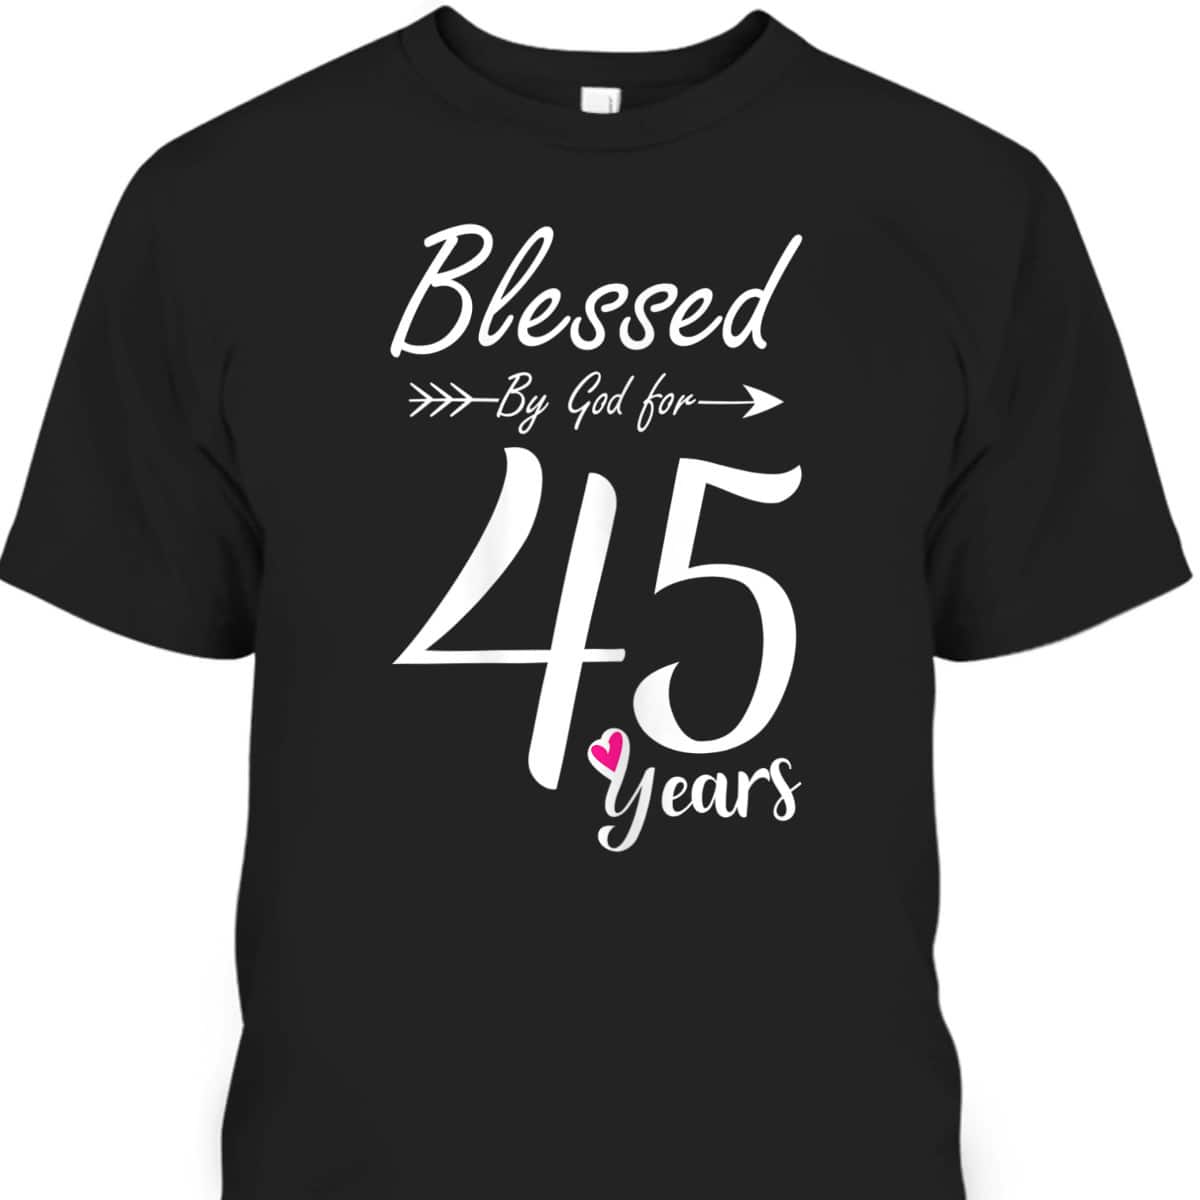 45th Birthday Gift And Blessed For 45 Years Birthday Christian T-Shirt